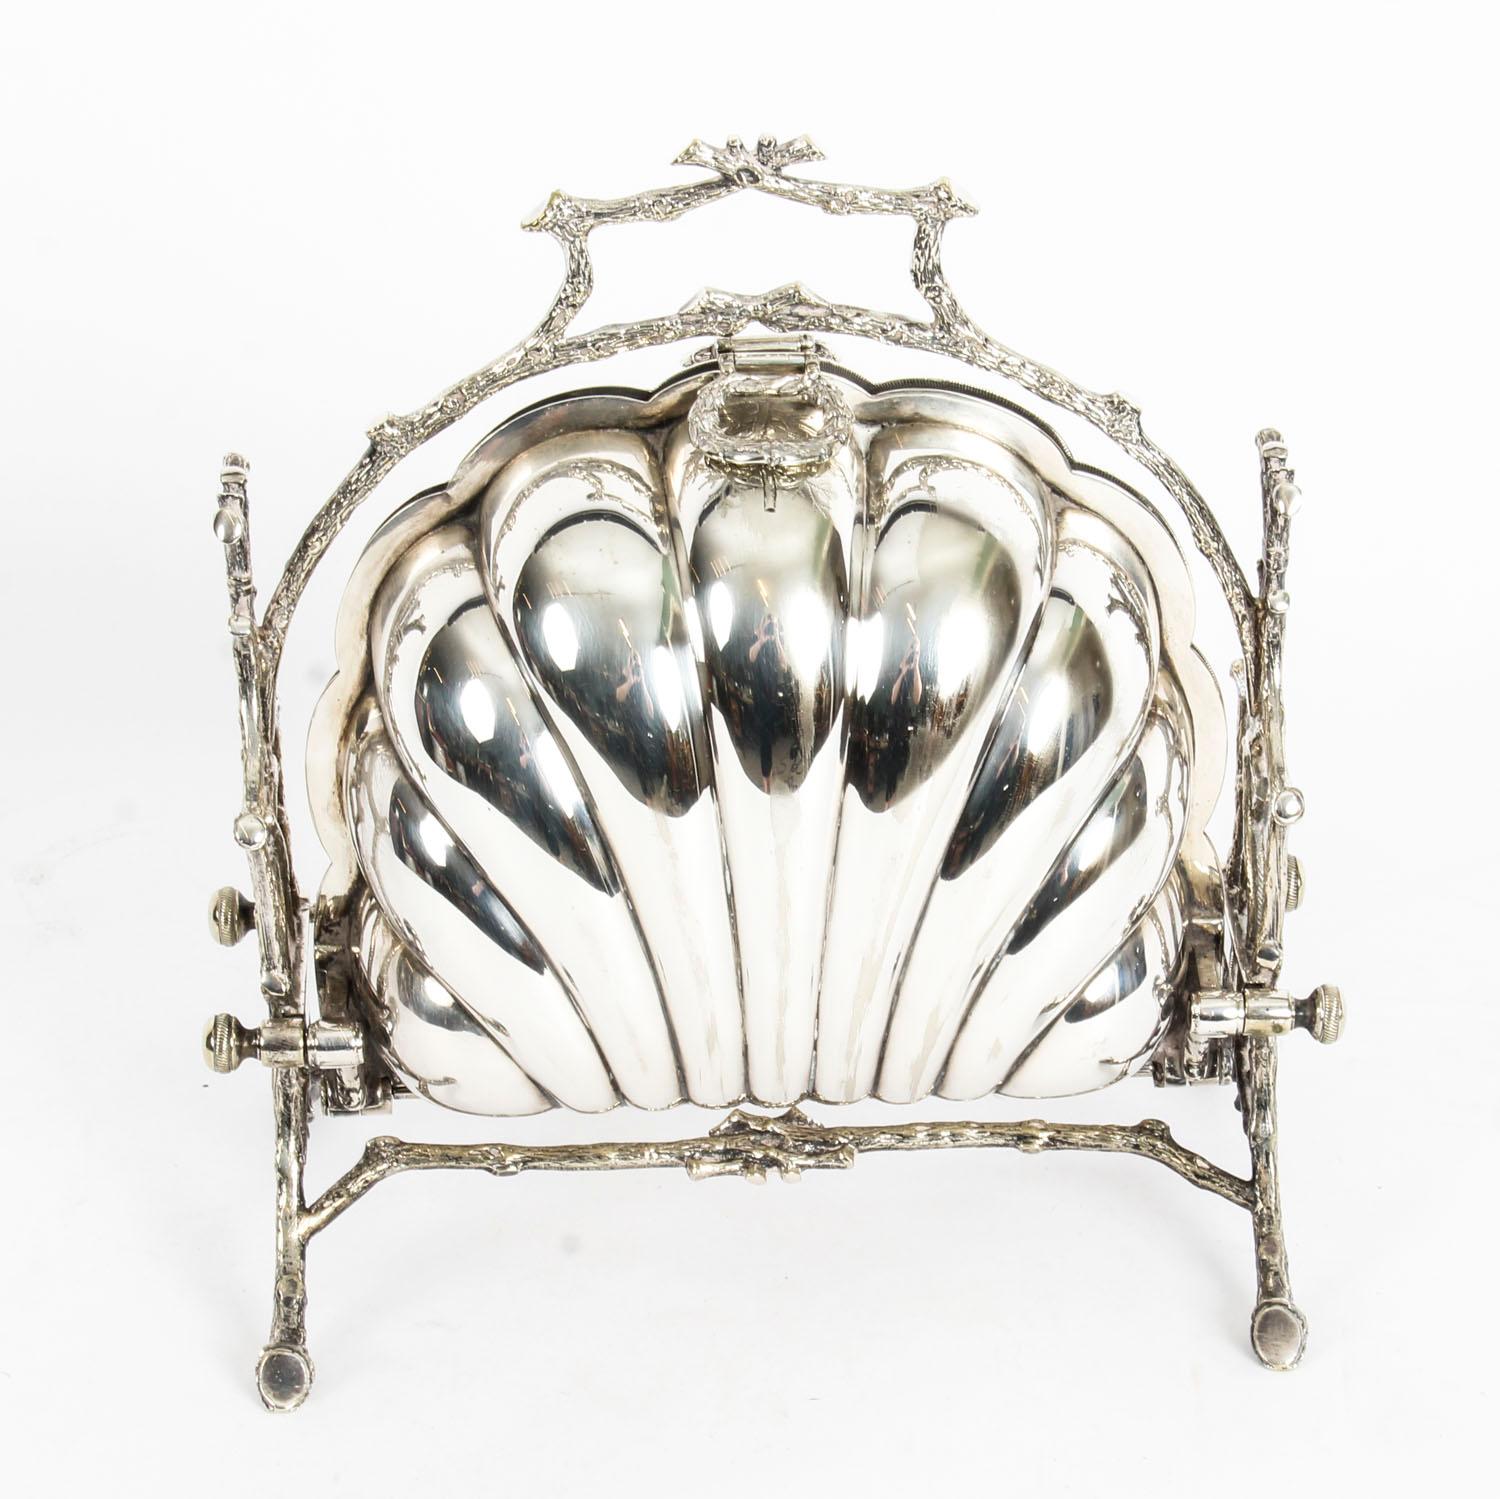 This is a highly decorative antique Victorian silver plated folding biscuit box, the base bearing the makers' mark of the renowned silversmiths Fenton Brothers of Sheffield, England, circa 1890 in date and bearing the Staniforth's Patent mark as